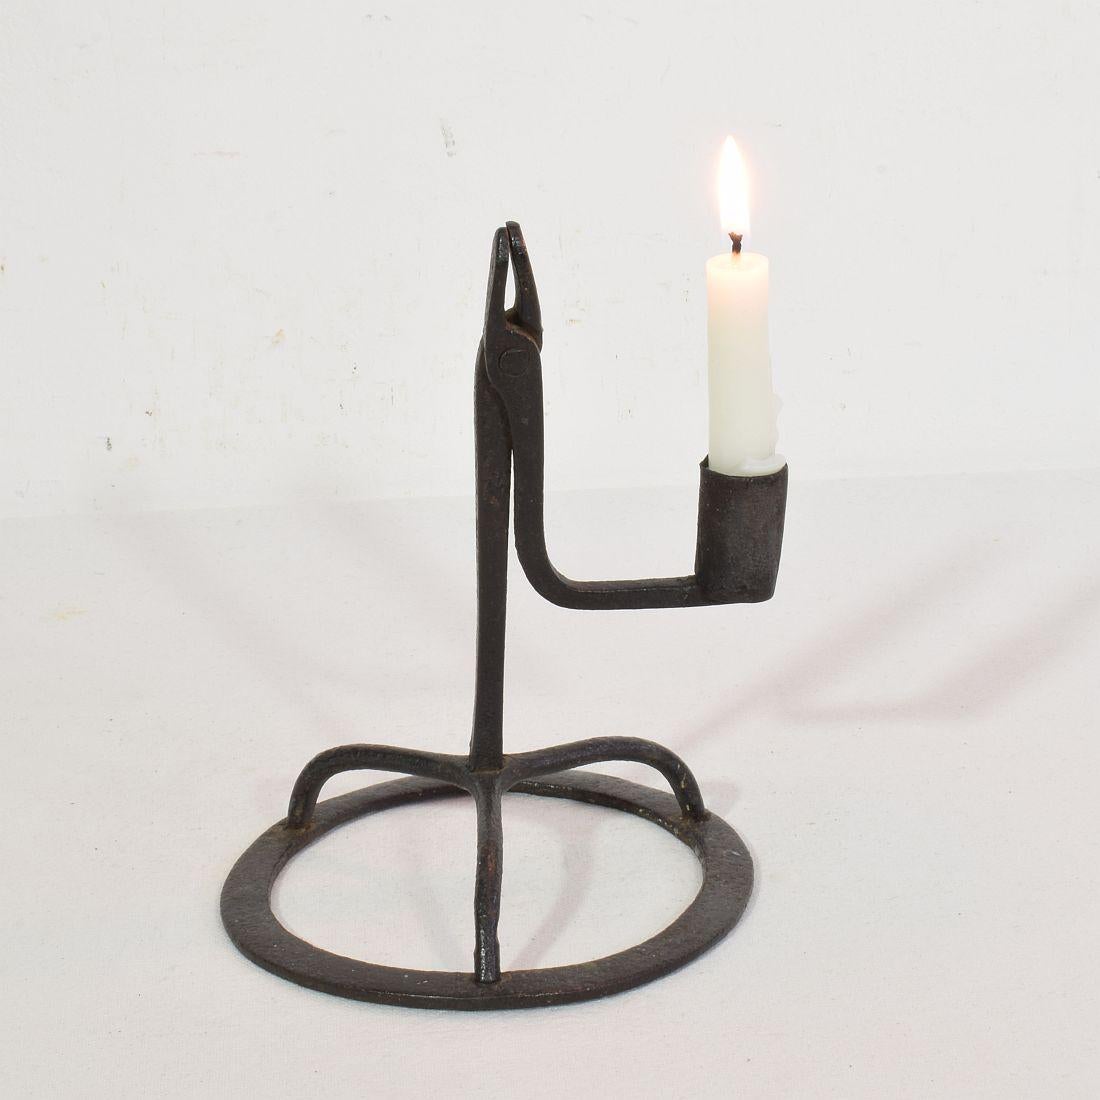 Very old and beautiful hand forged iron candleholder.
France, circa 1650-1750. Weathered.